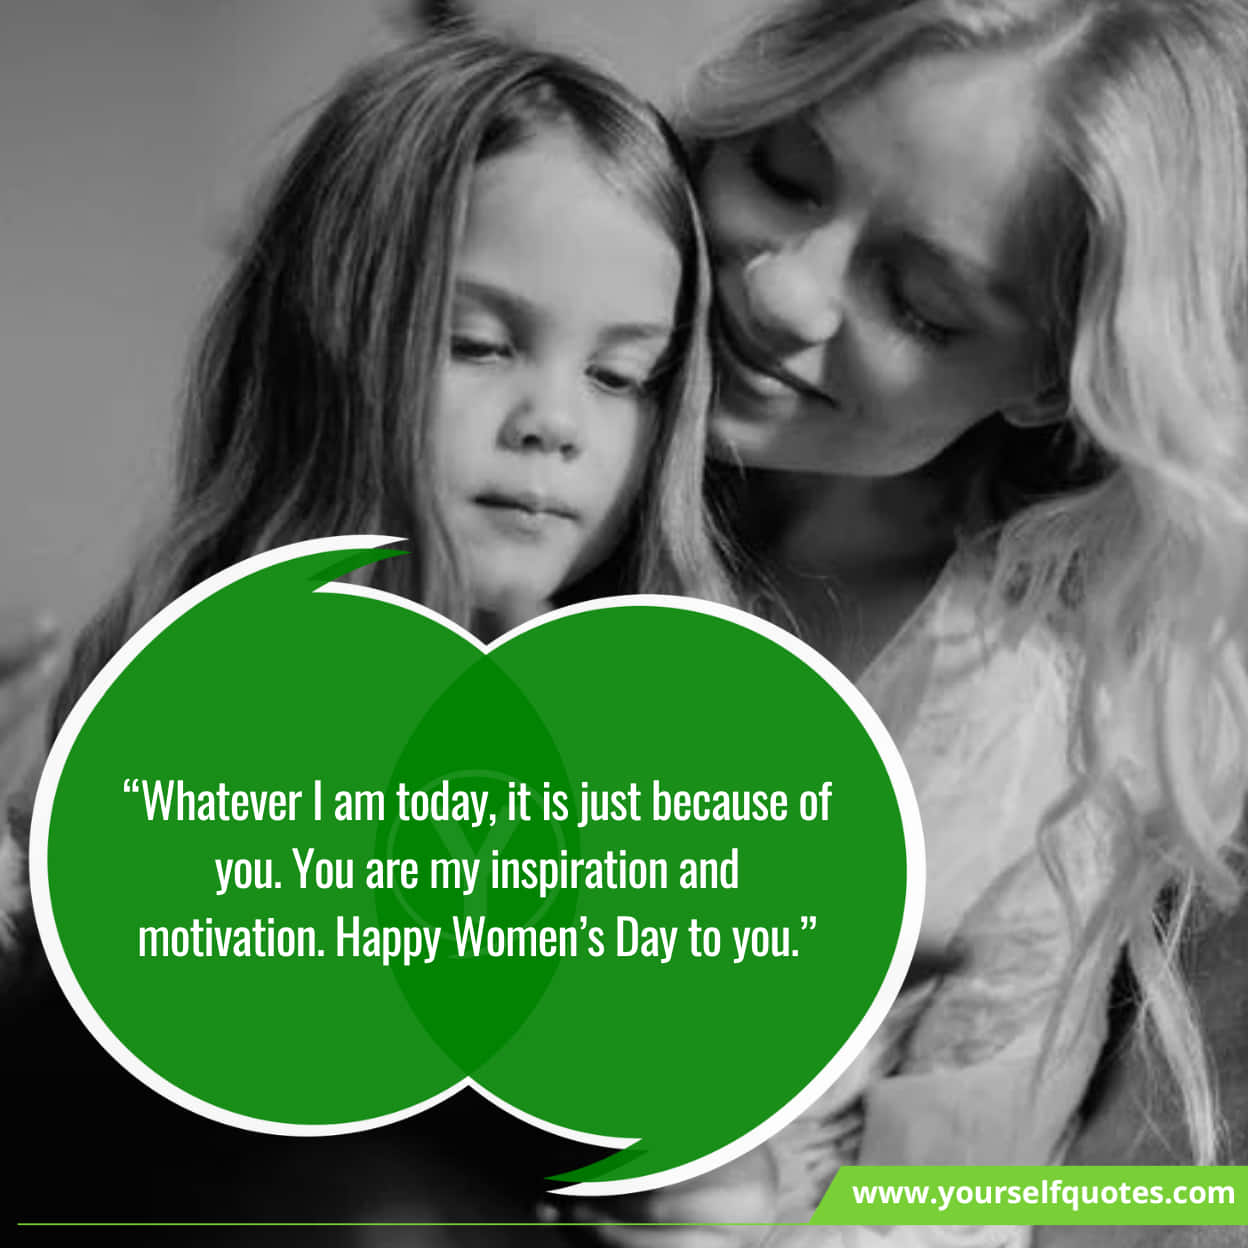 Best Wishes To Daughter About Happy Women's Day